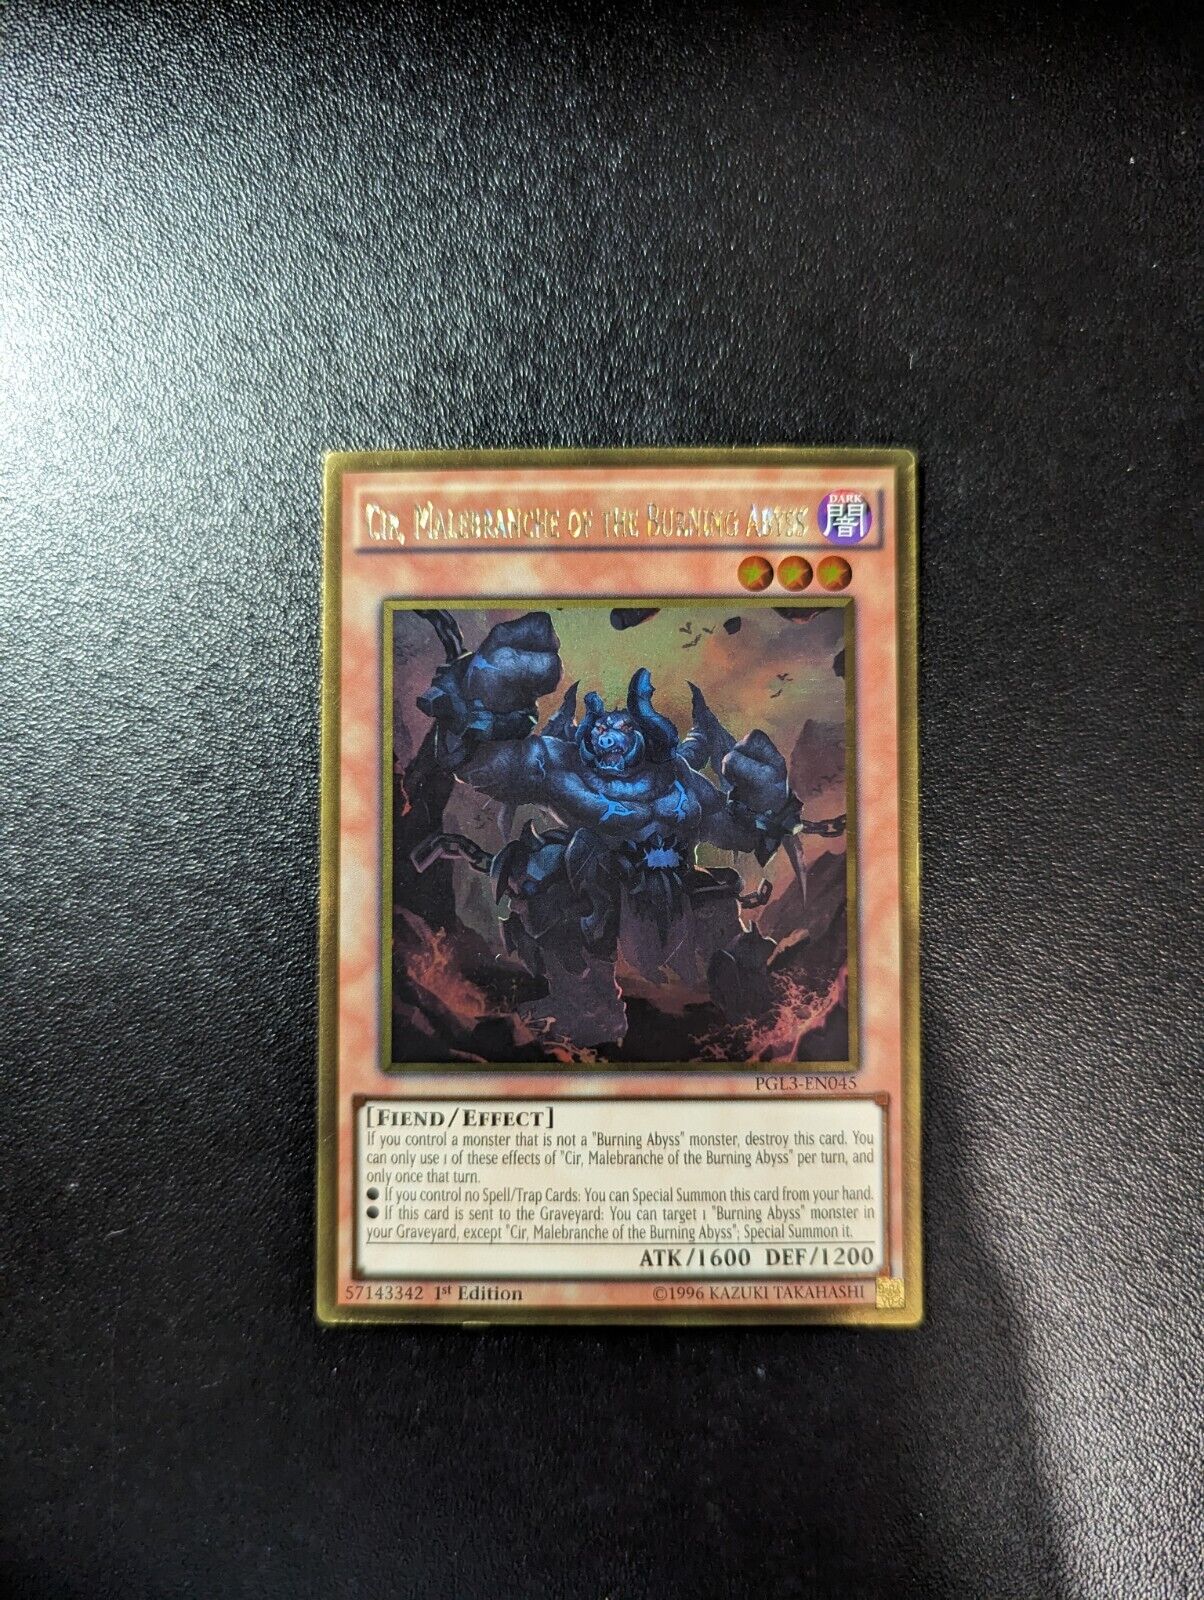 PGL3-EN045 Cir, Malebranche Of The Burning Abyss Gold Rare 1st Edition Yugioh